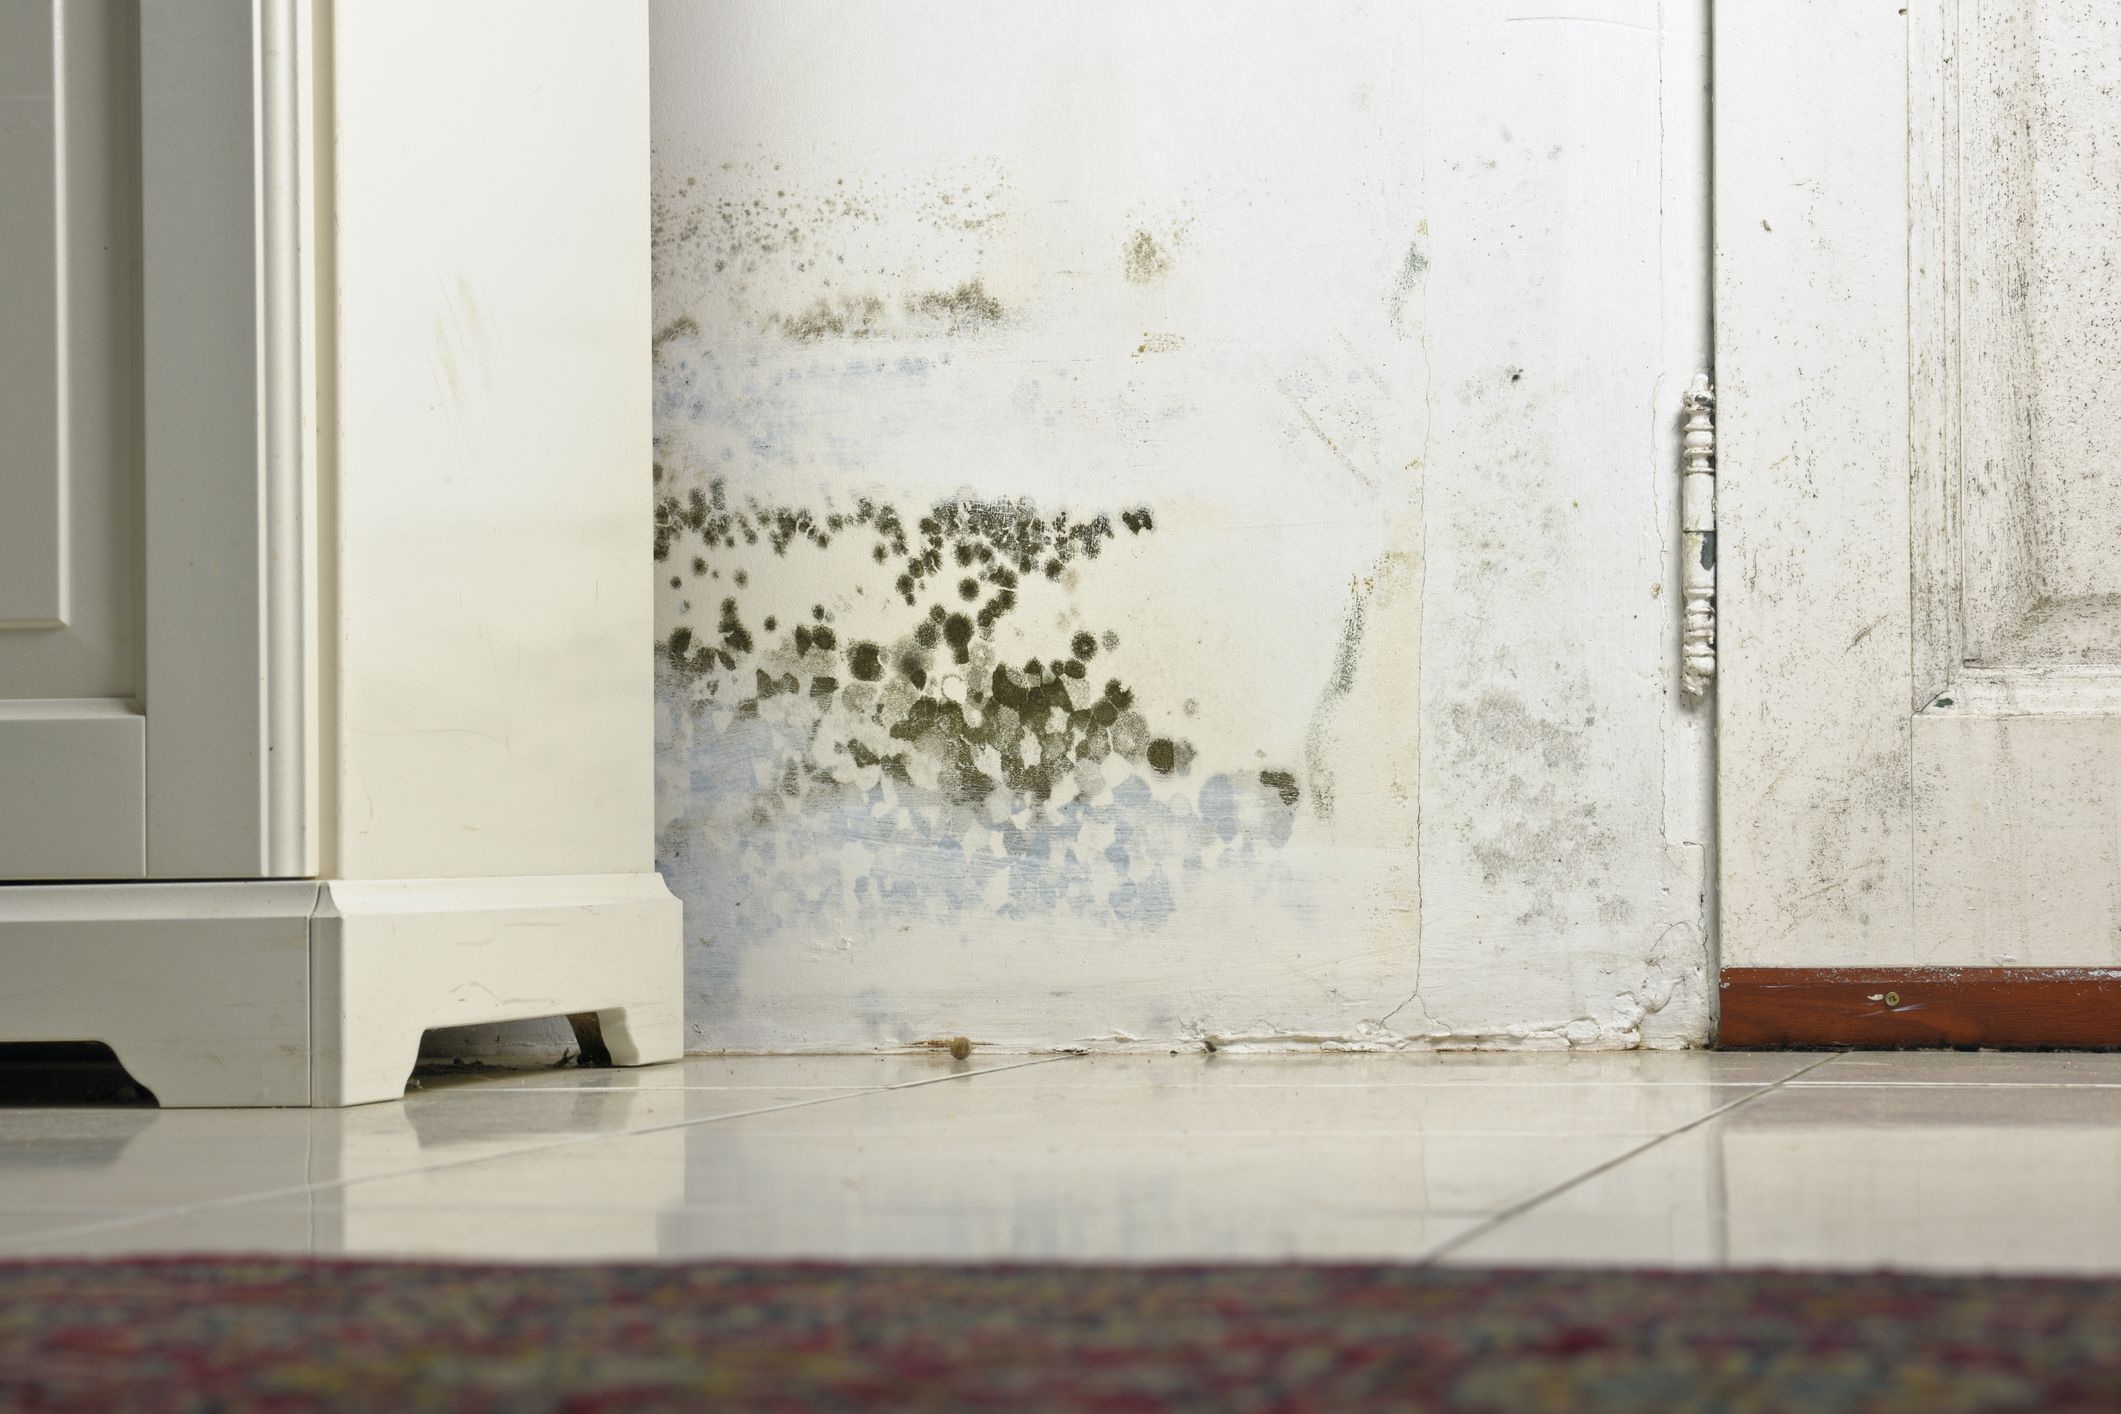 How to Find & Fix Hidden Black Mold in Your Home